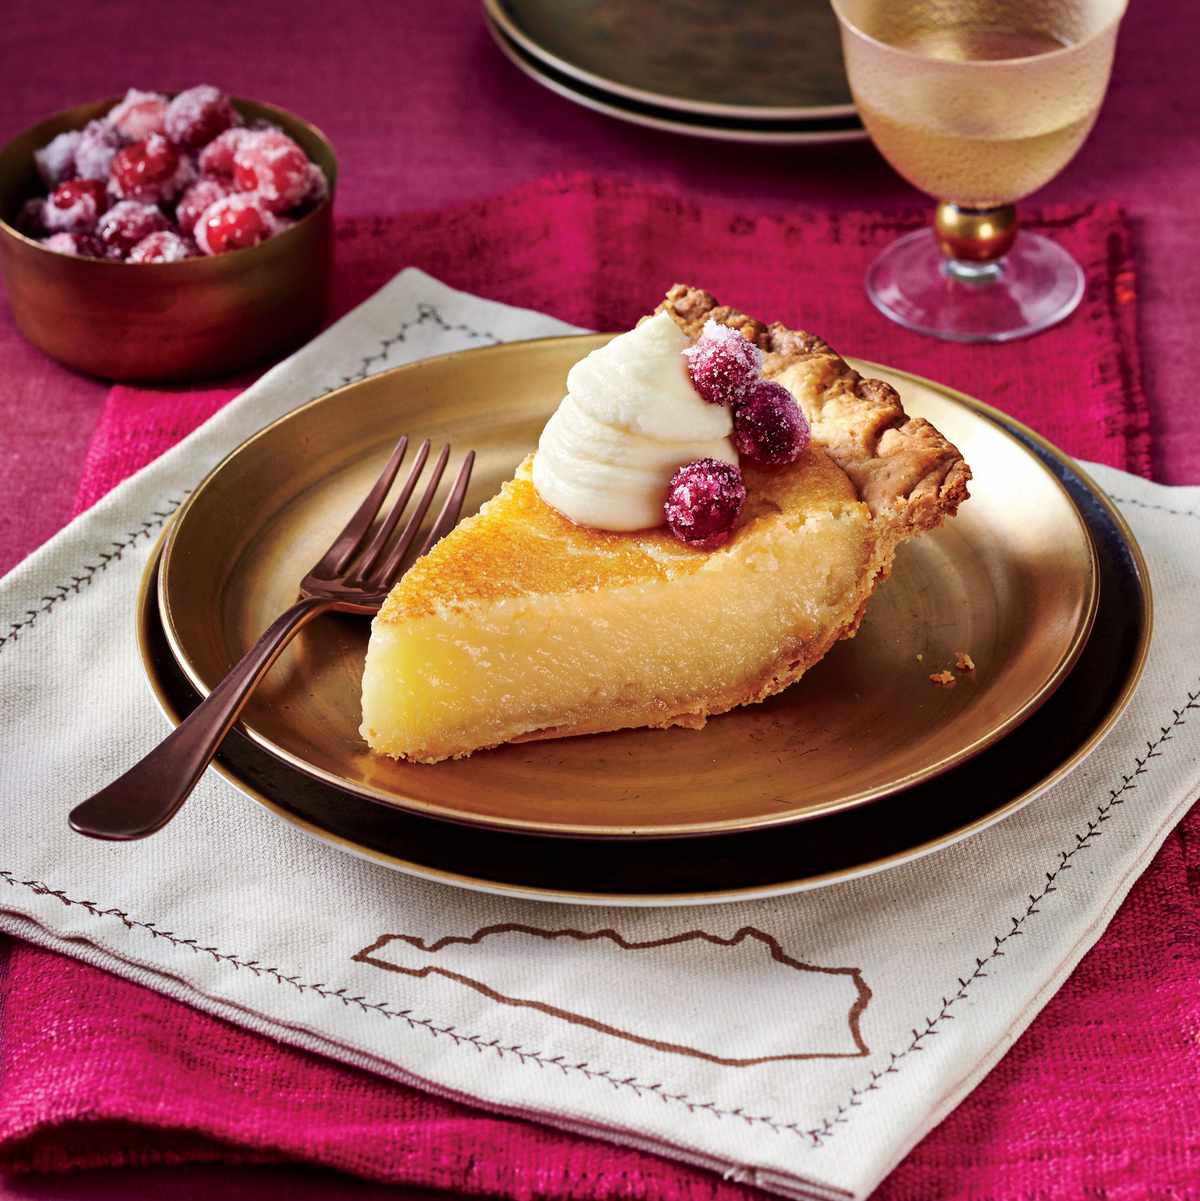 Transparent Pie with Whipped Cr&egrave;me Fra&icirc;che and Sugared Cranberries